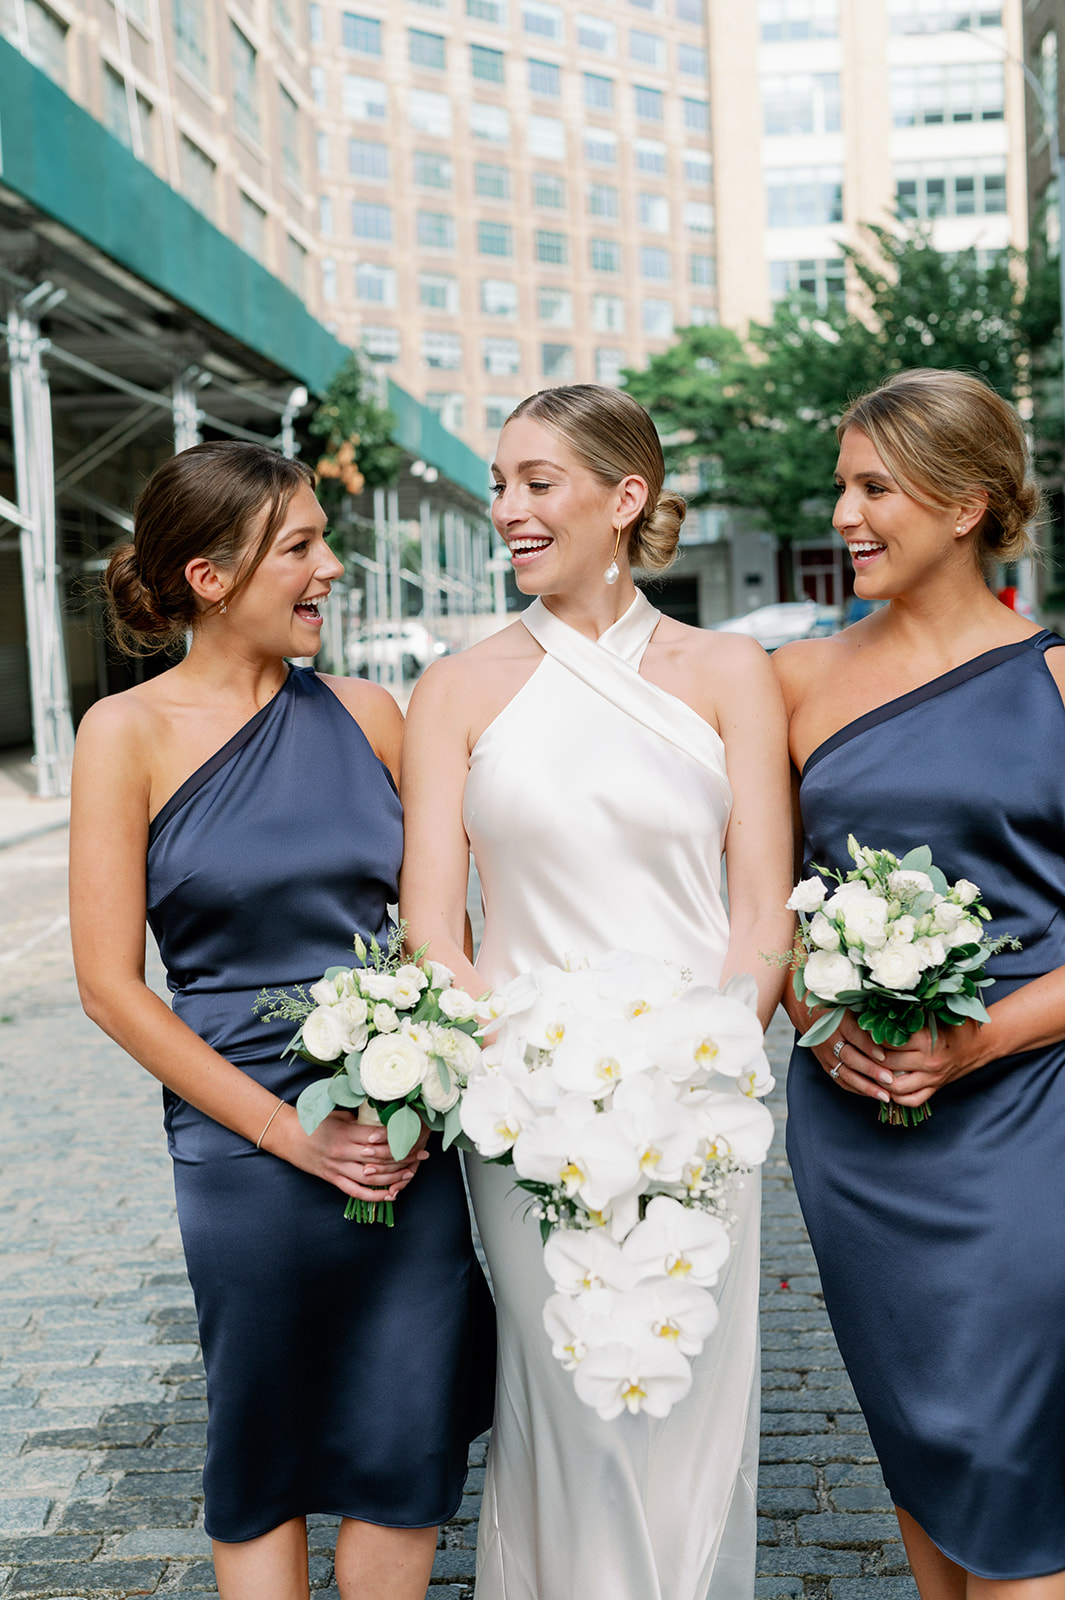 Tribeca Rooftop bride and bridesmaid candid portrait, featuring navy blue bridesmaid dresses in this New York wedding celebration.